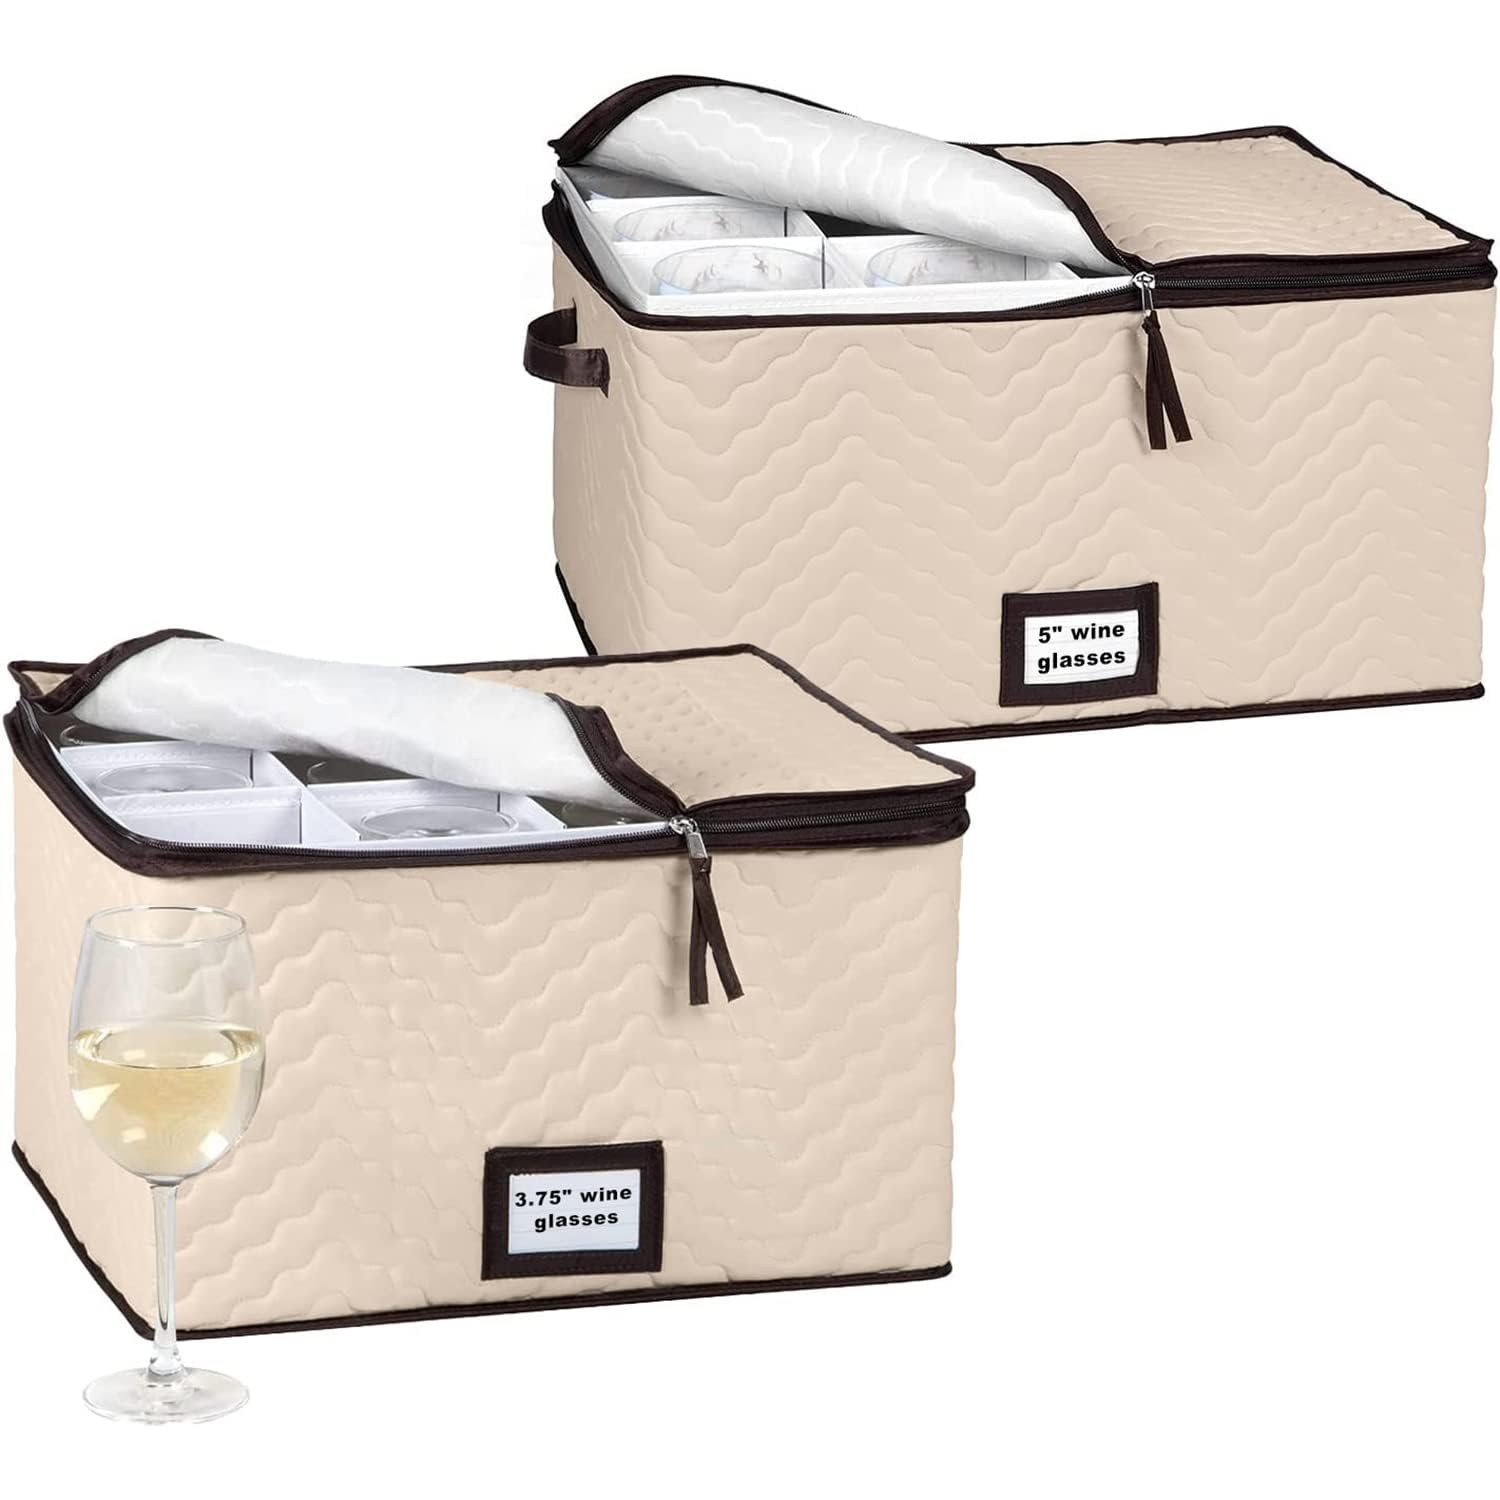 Hold N Storage Pack of 2 Sizes Wine Glass Storage with Dividers - Each Holds 12 Standard Size Wine Glasses Up to 10" H - Stemware Storage Case, Protects Fine China, Durable Quilted Microfiber Bin  - Like New